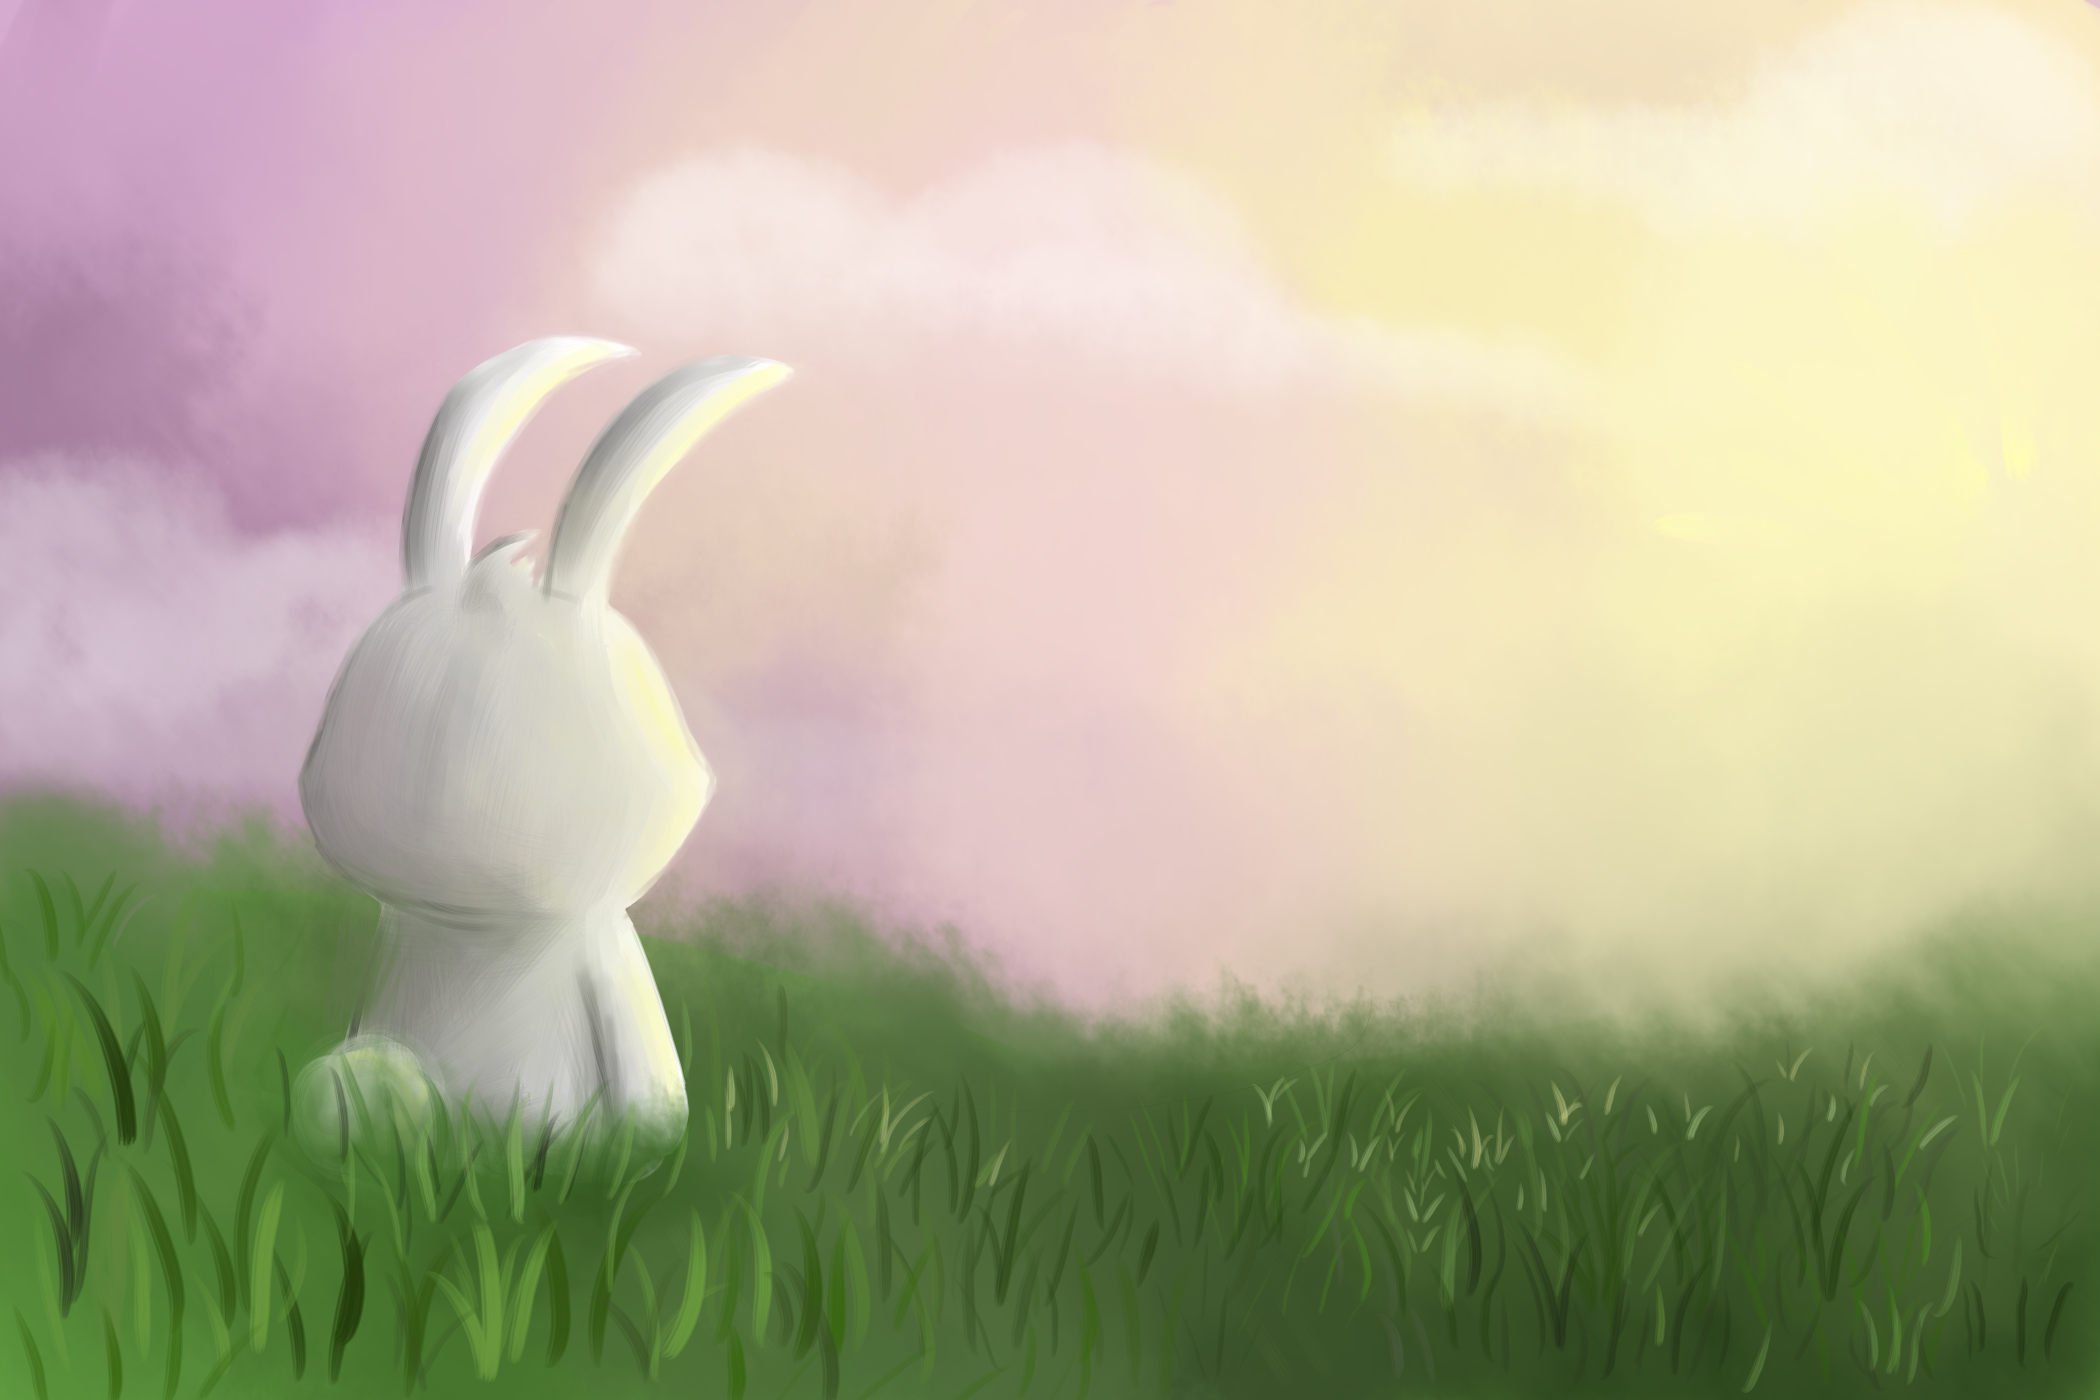 Lonely Easter Bunny by poloisindahouse on DeviantArt